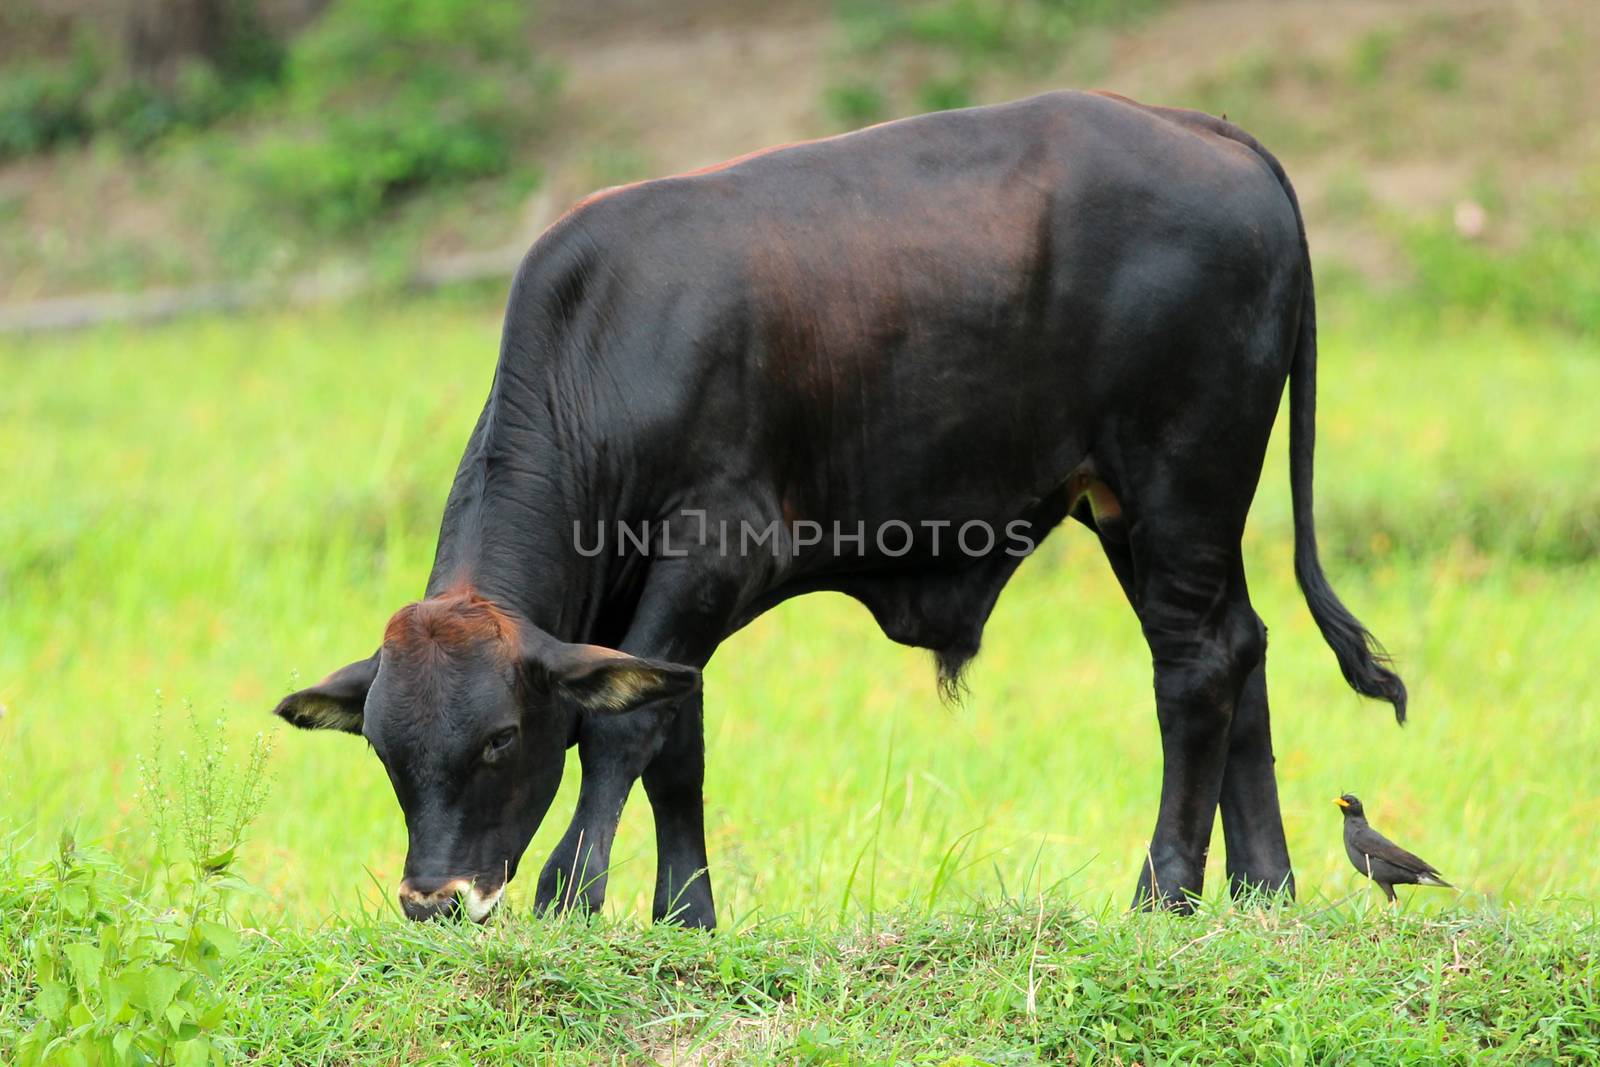 Image of a cow on nature background by yod67